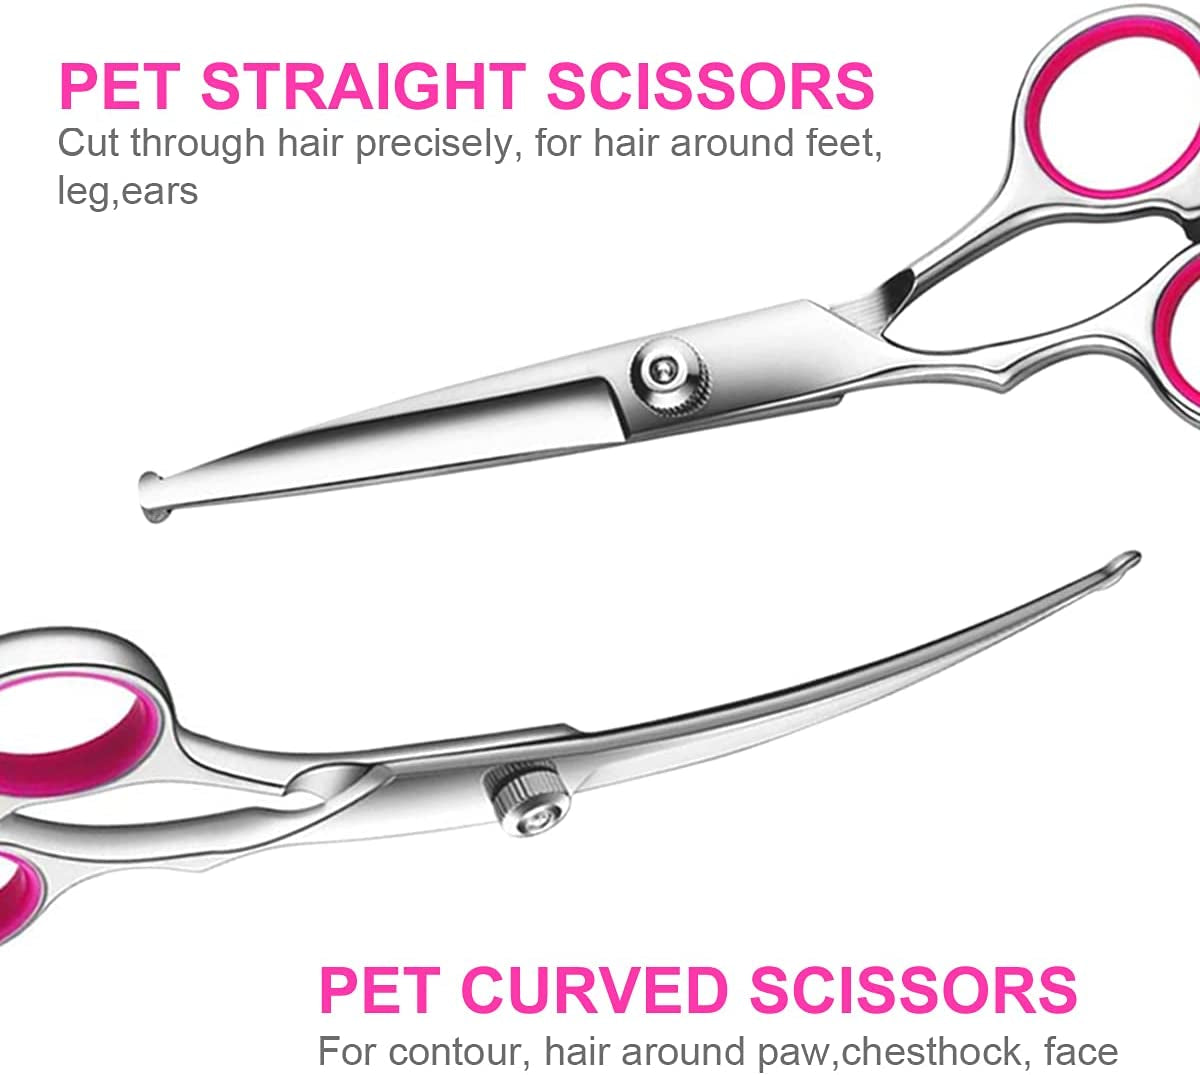 Dog Grooming Scissors Kit with Safety round Tips, Stainless Steel Professional Dog Grooming Shears Set - Thinning, Straight, Curved Shears and Comb for Long Short Hair for Dog Cat Pet